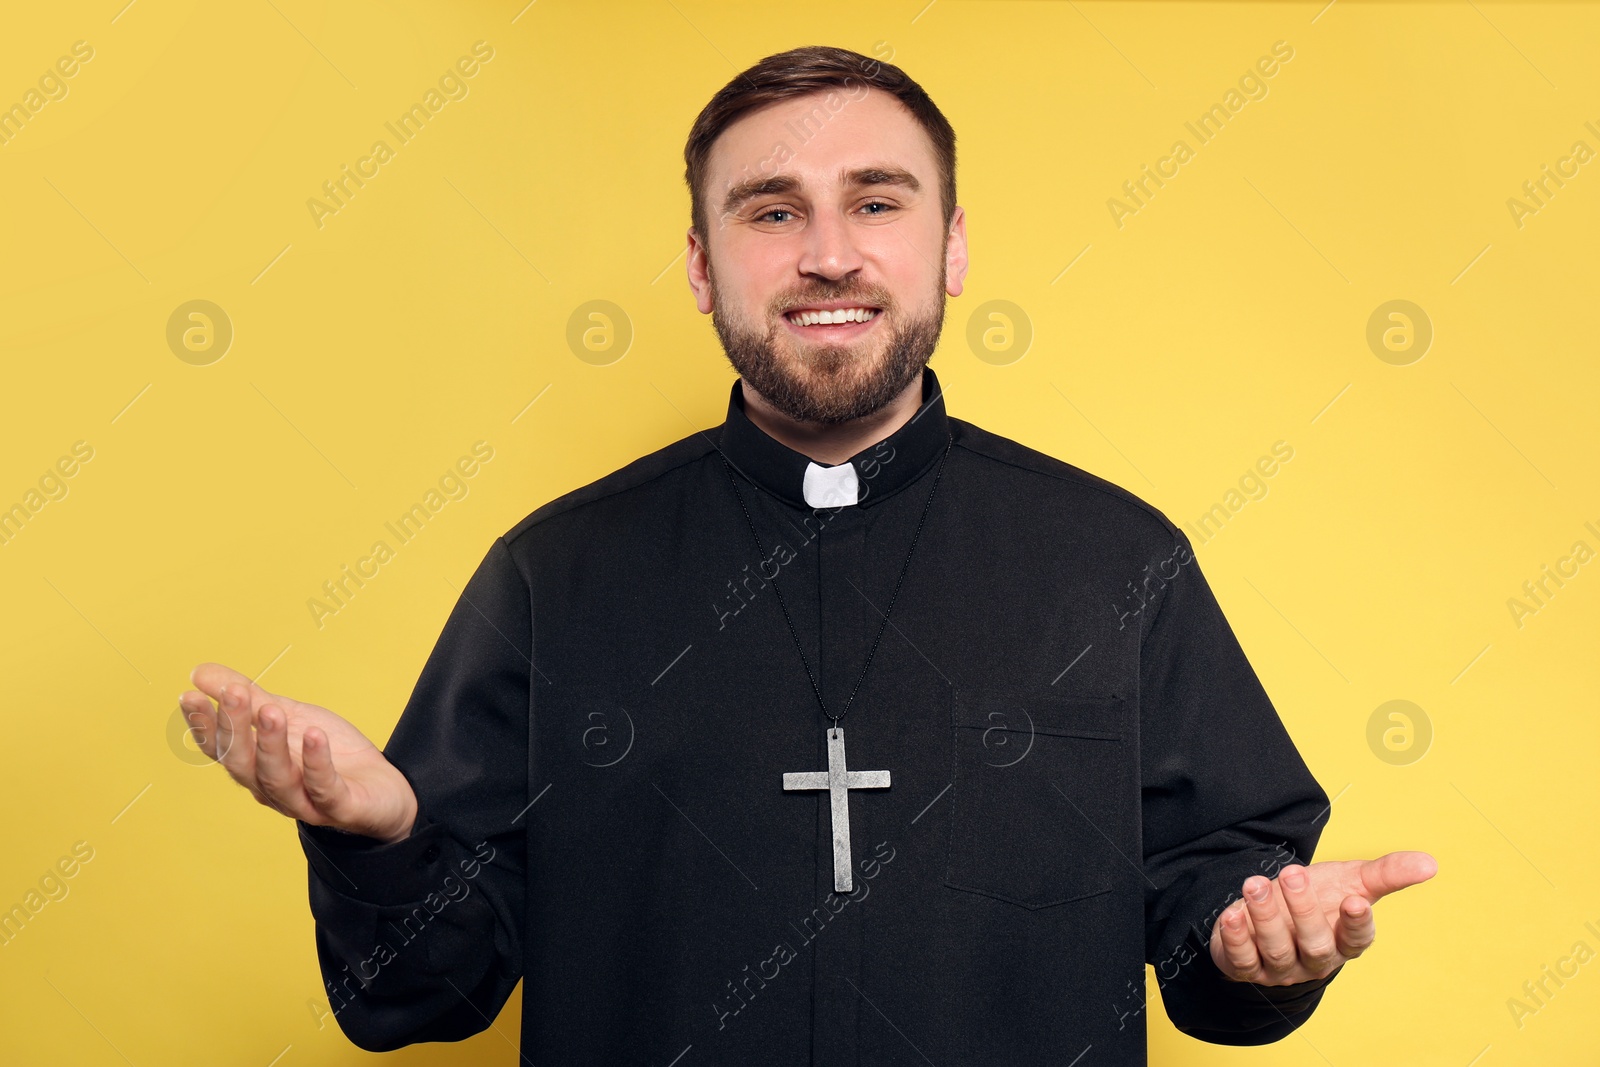 Photo of Priest wearing cassock with clerical collar on yellow background